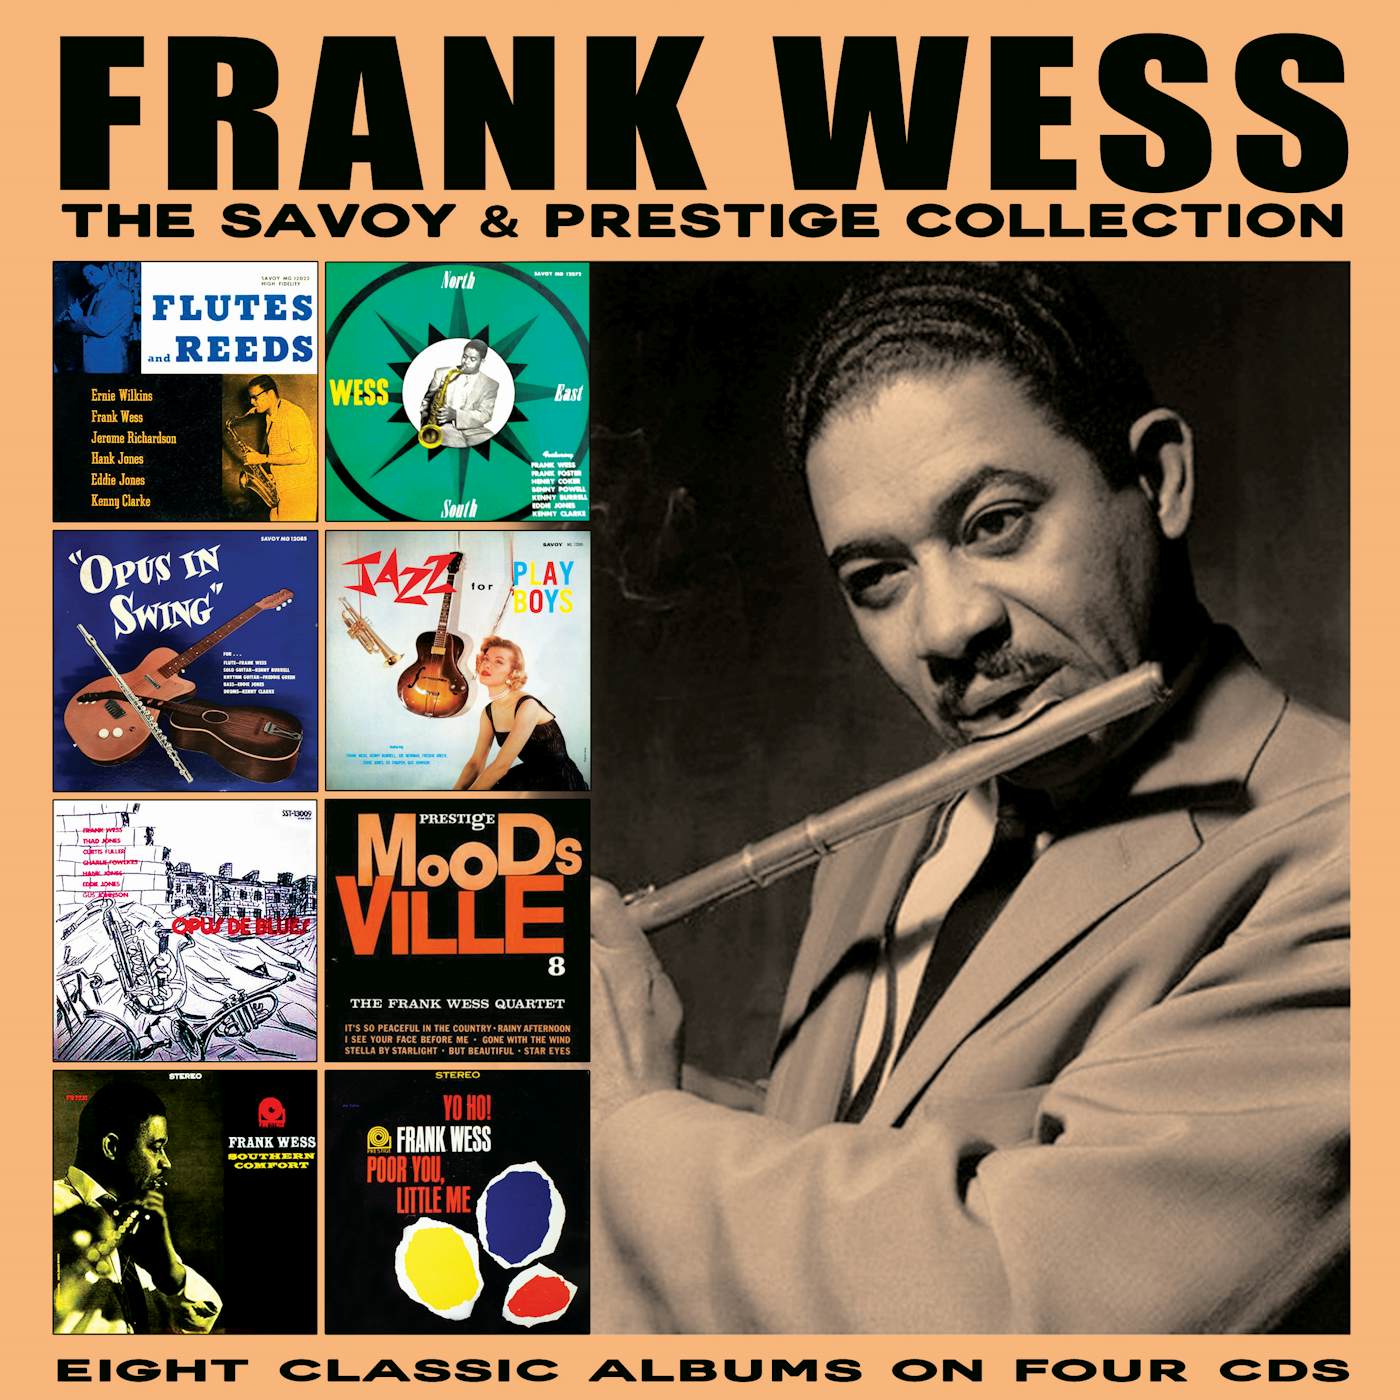 Frank Wess SAVOY & PRESTIGE COLLECTION CD